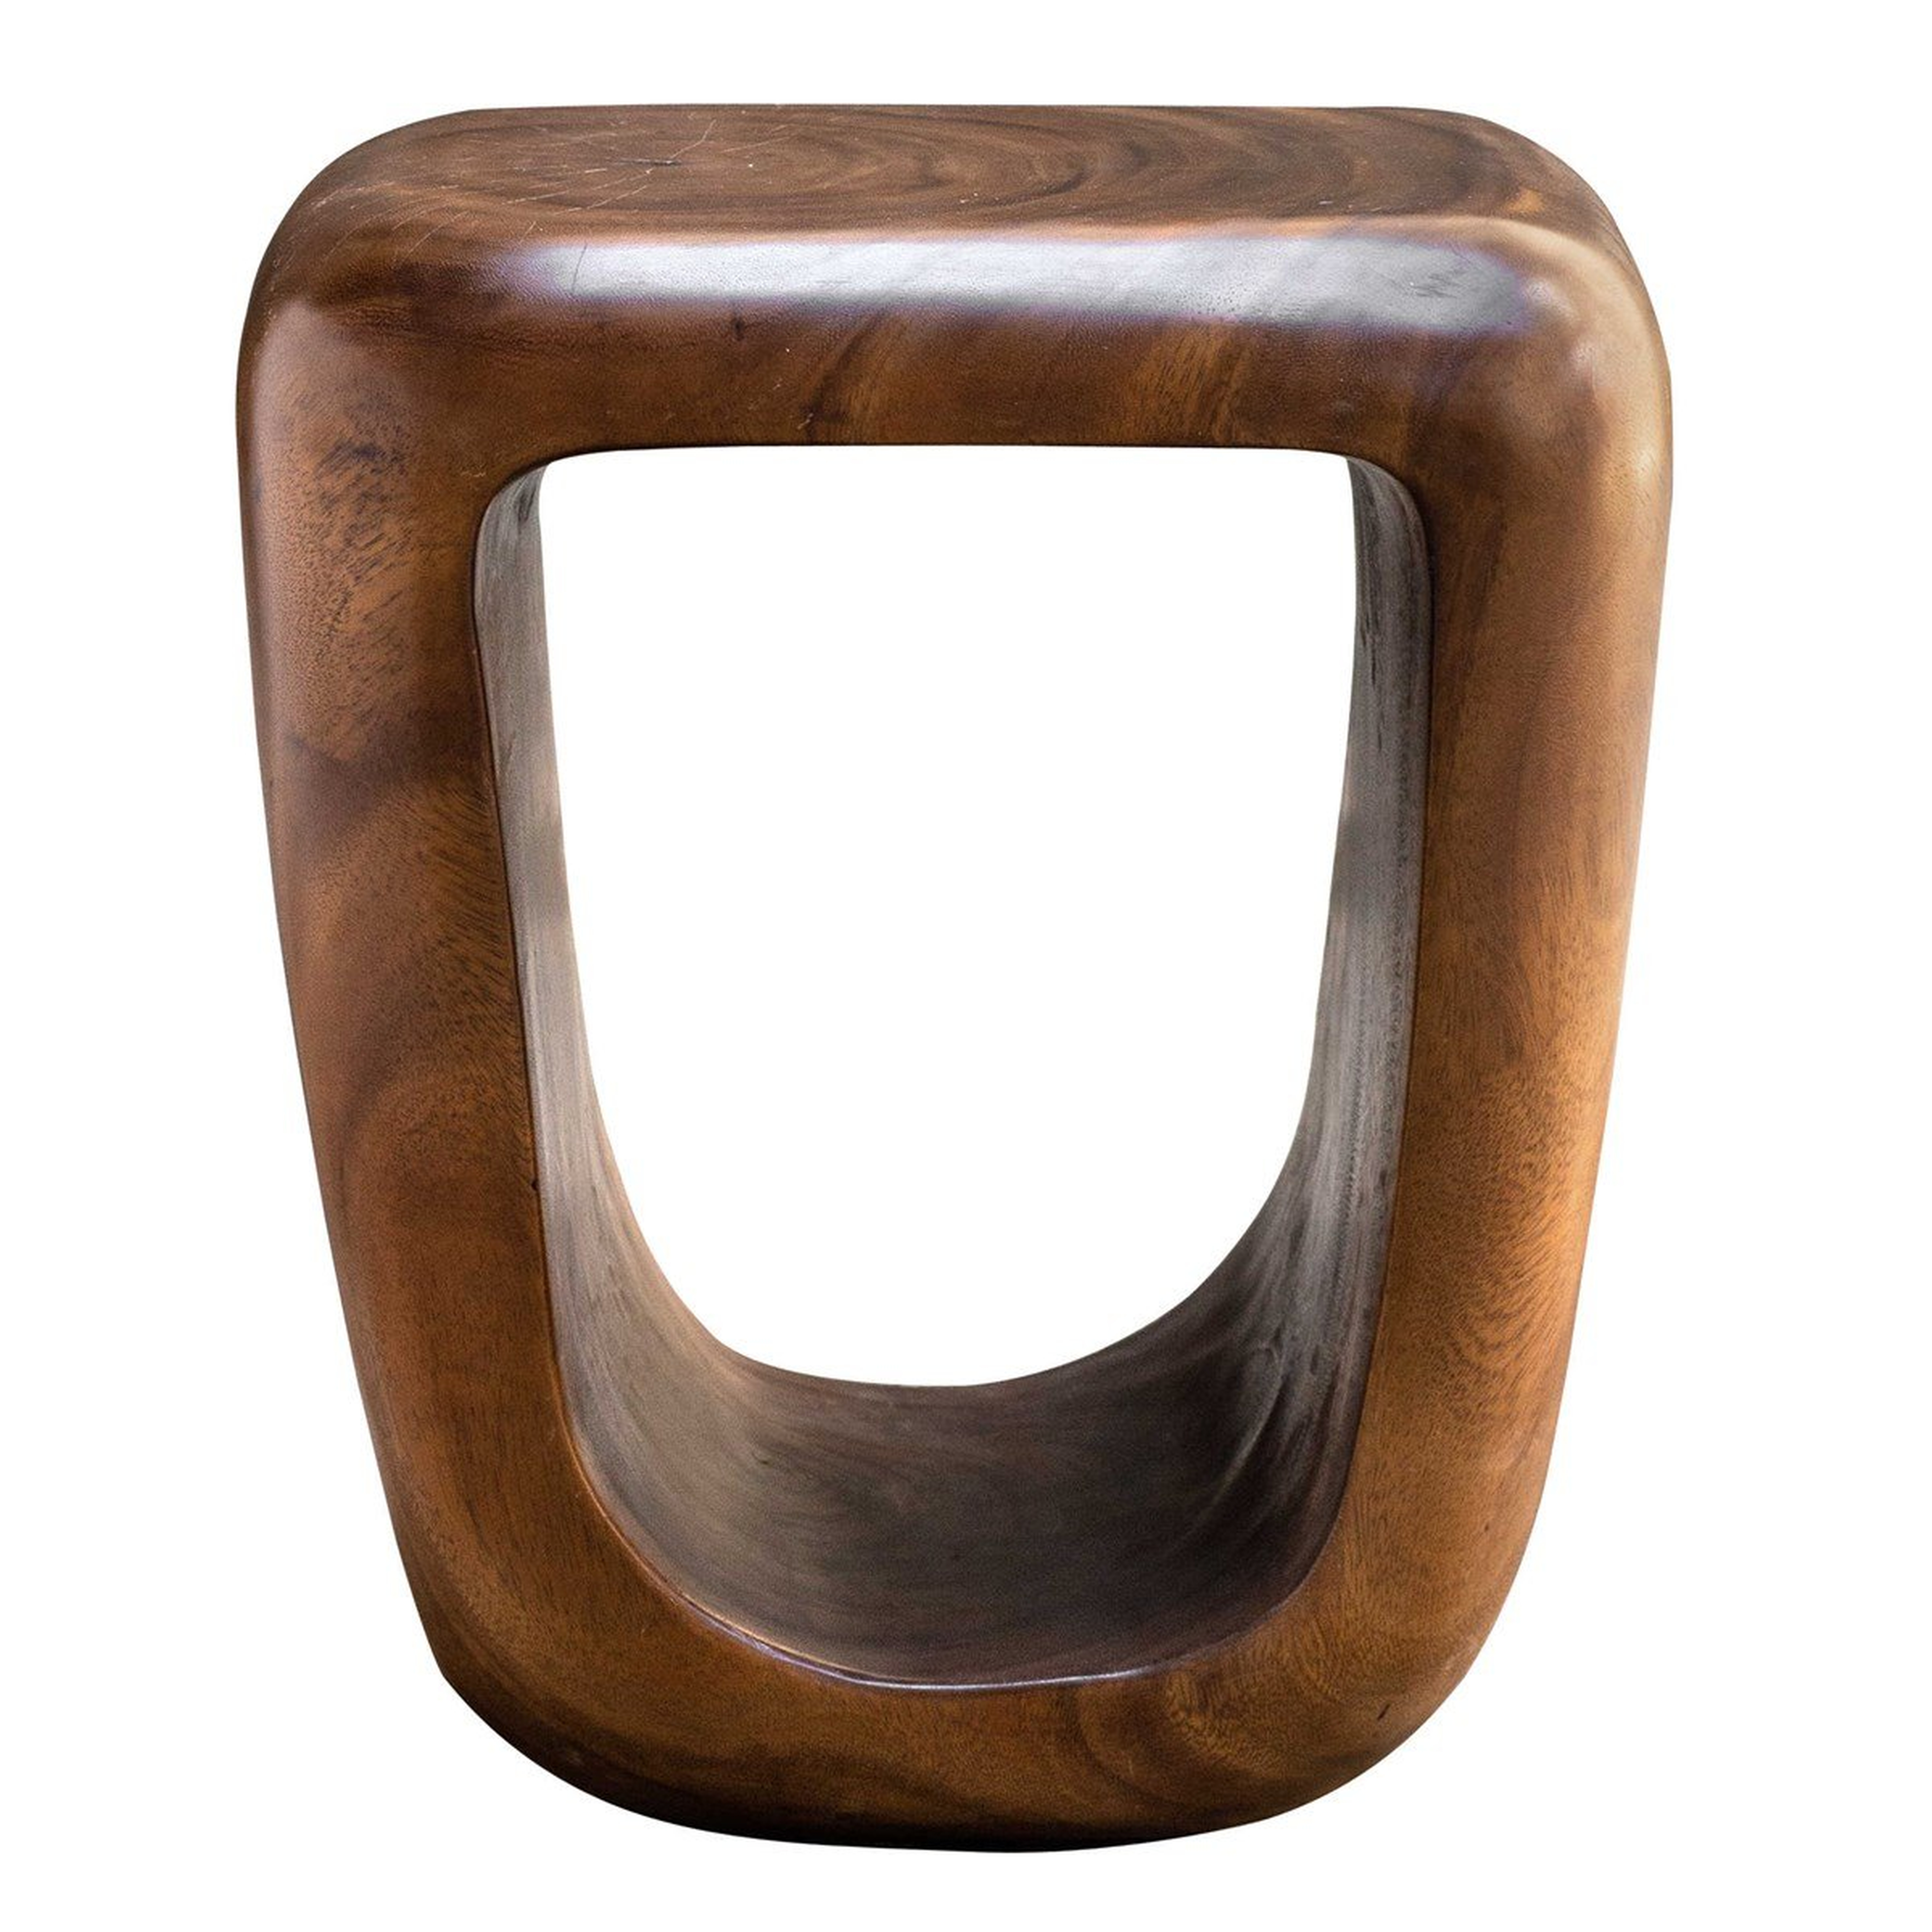 Loophole Accent Stool - Hudsonhill Foundry